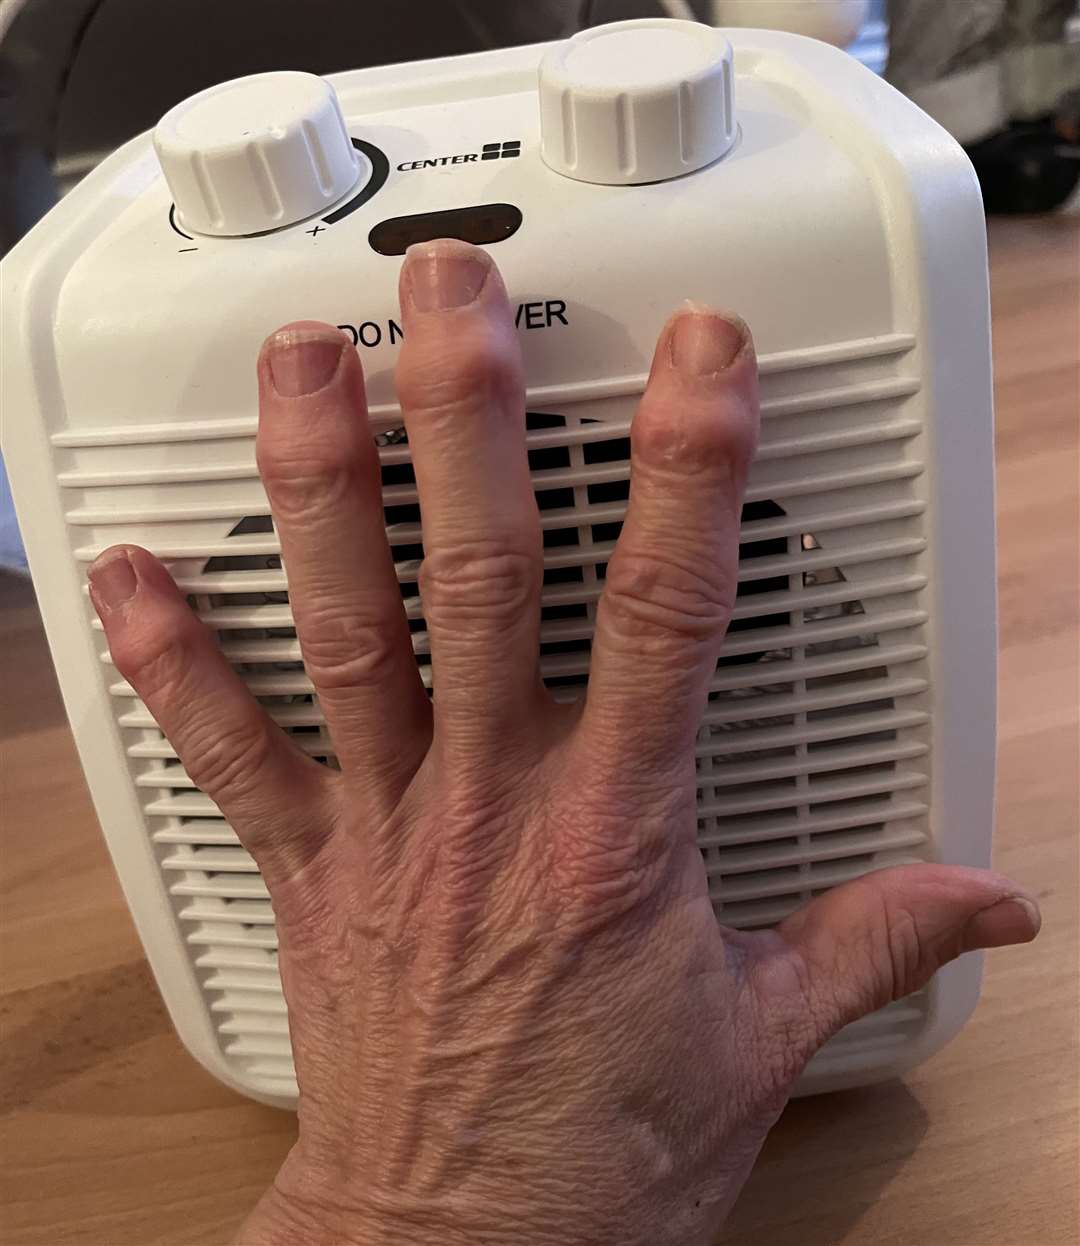 Ms Lodge was given a small heater the size of her hand